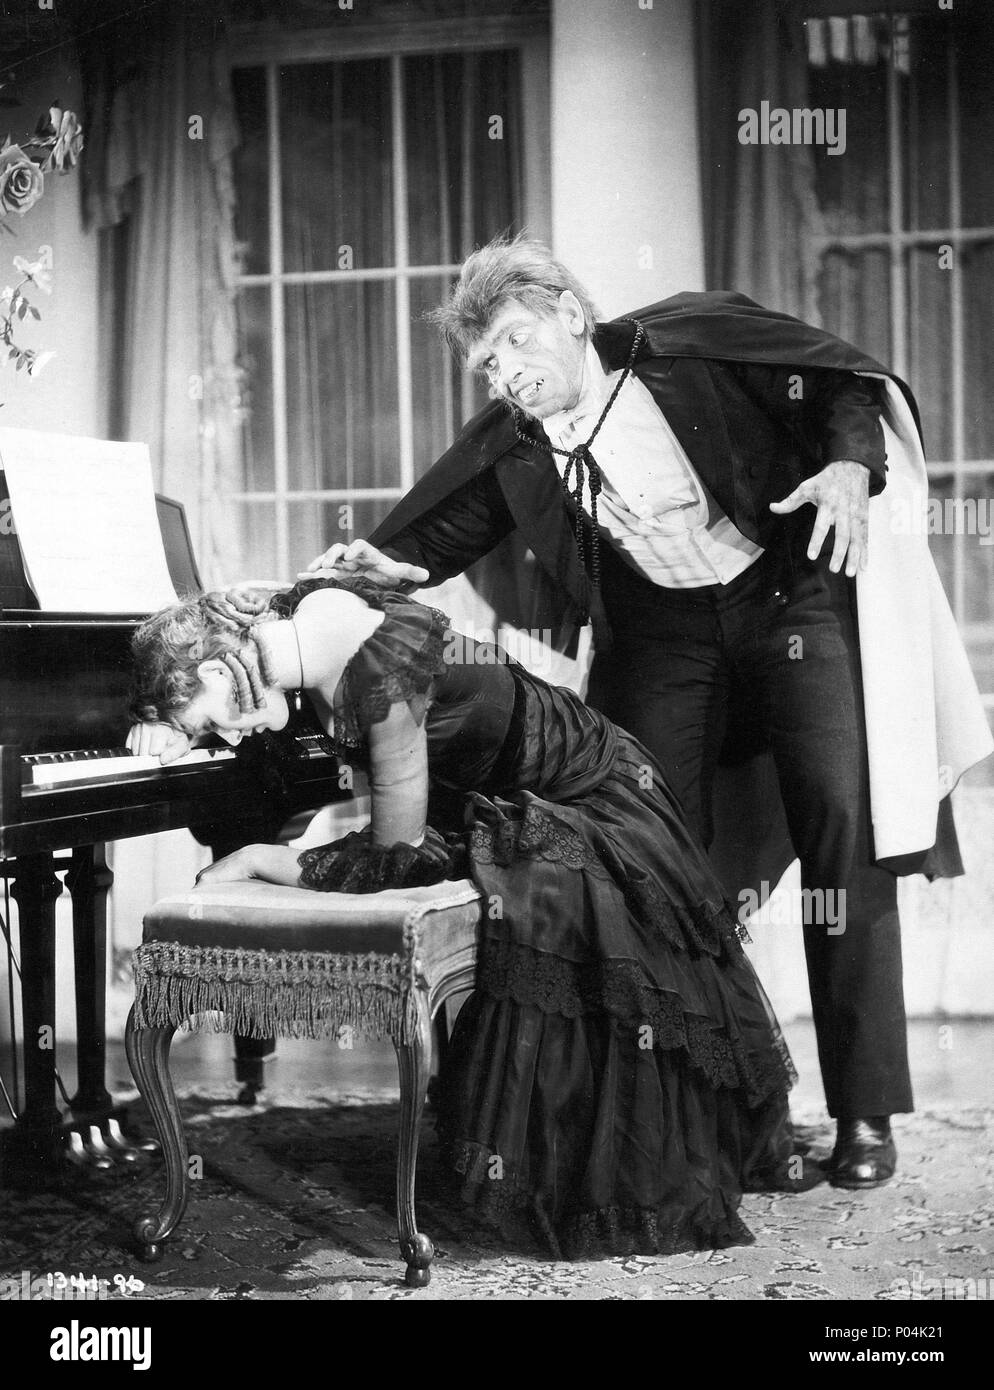 Original Film Title: DR. JEKYLL AND MR. HYDE.  English Title: DR. JEKYLL AND MR. HYDE.  Film Director: ROUBEN MAMOULIAN.  Year: 1931.  Stars: FREDRIC MARCH; ROSE HOBART. Credit: PARAMOUNT PICTURES / Album Stock Photo